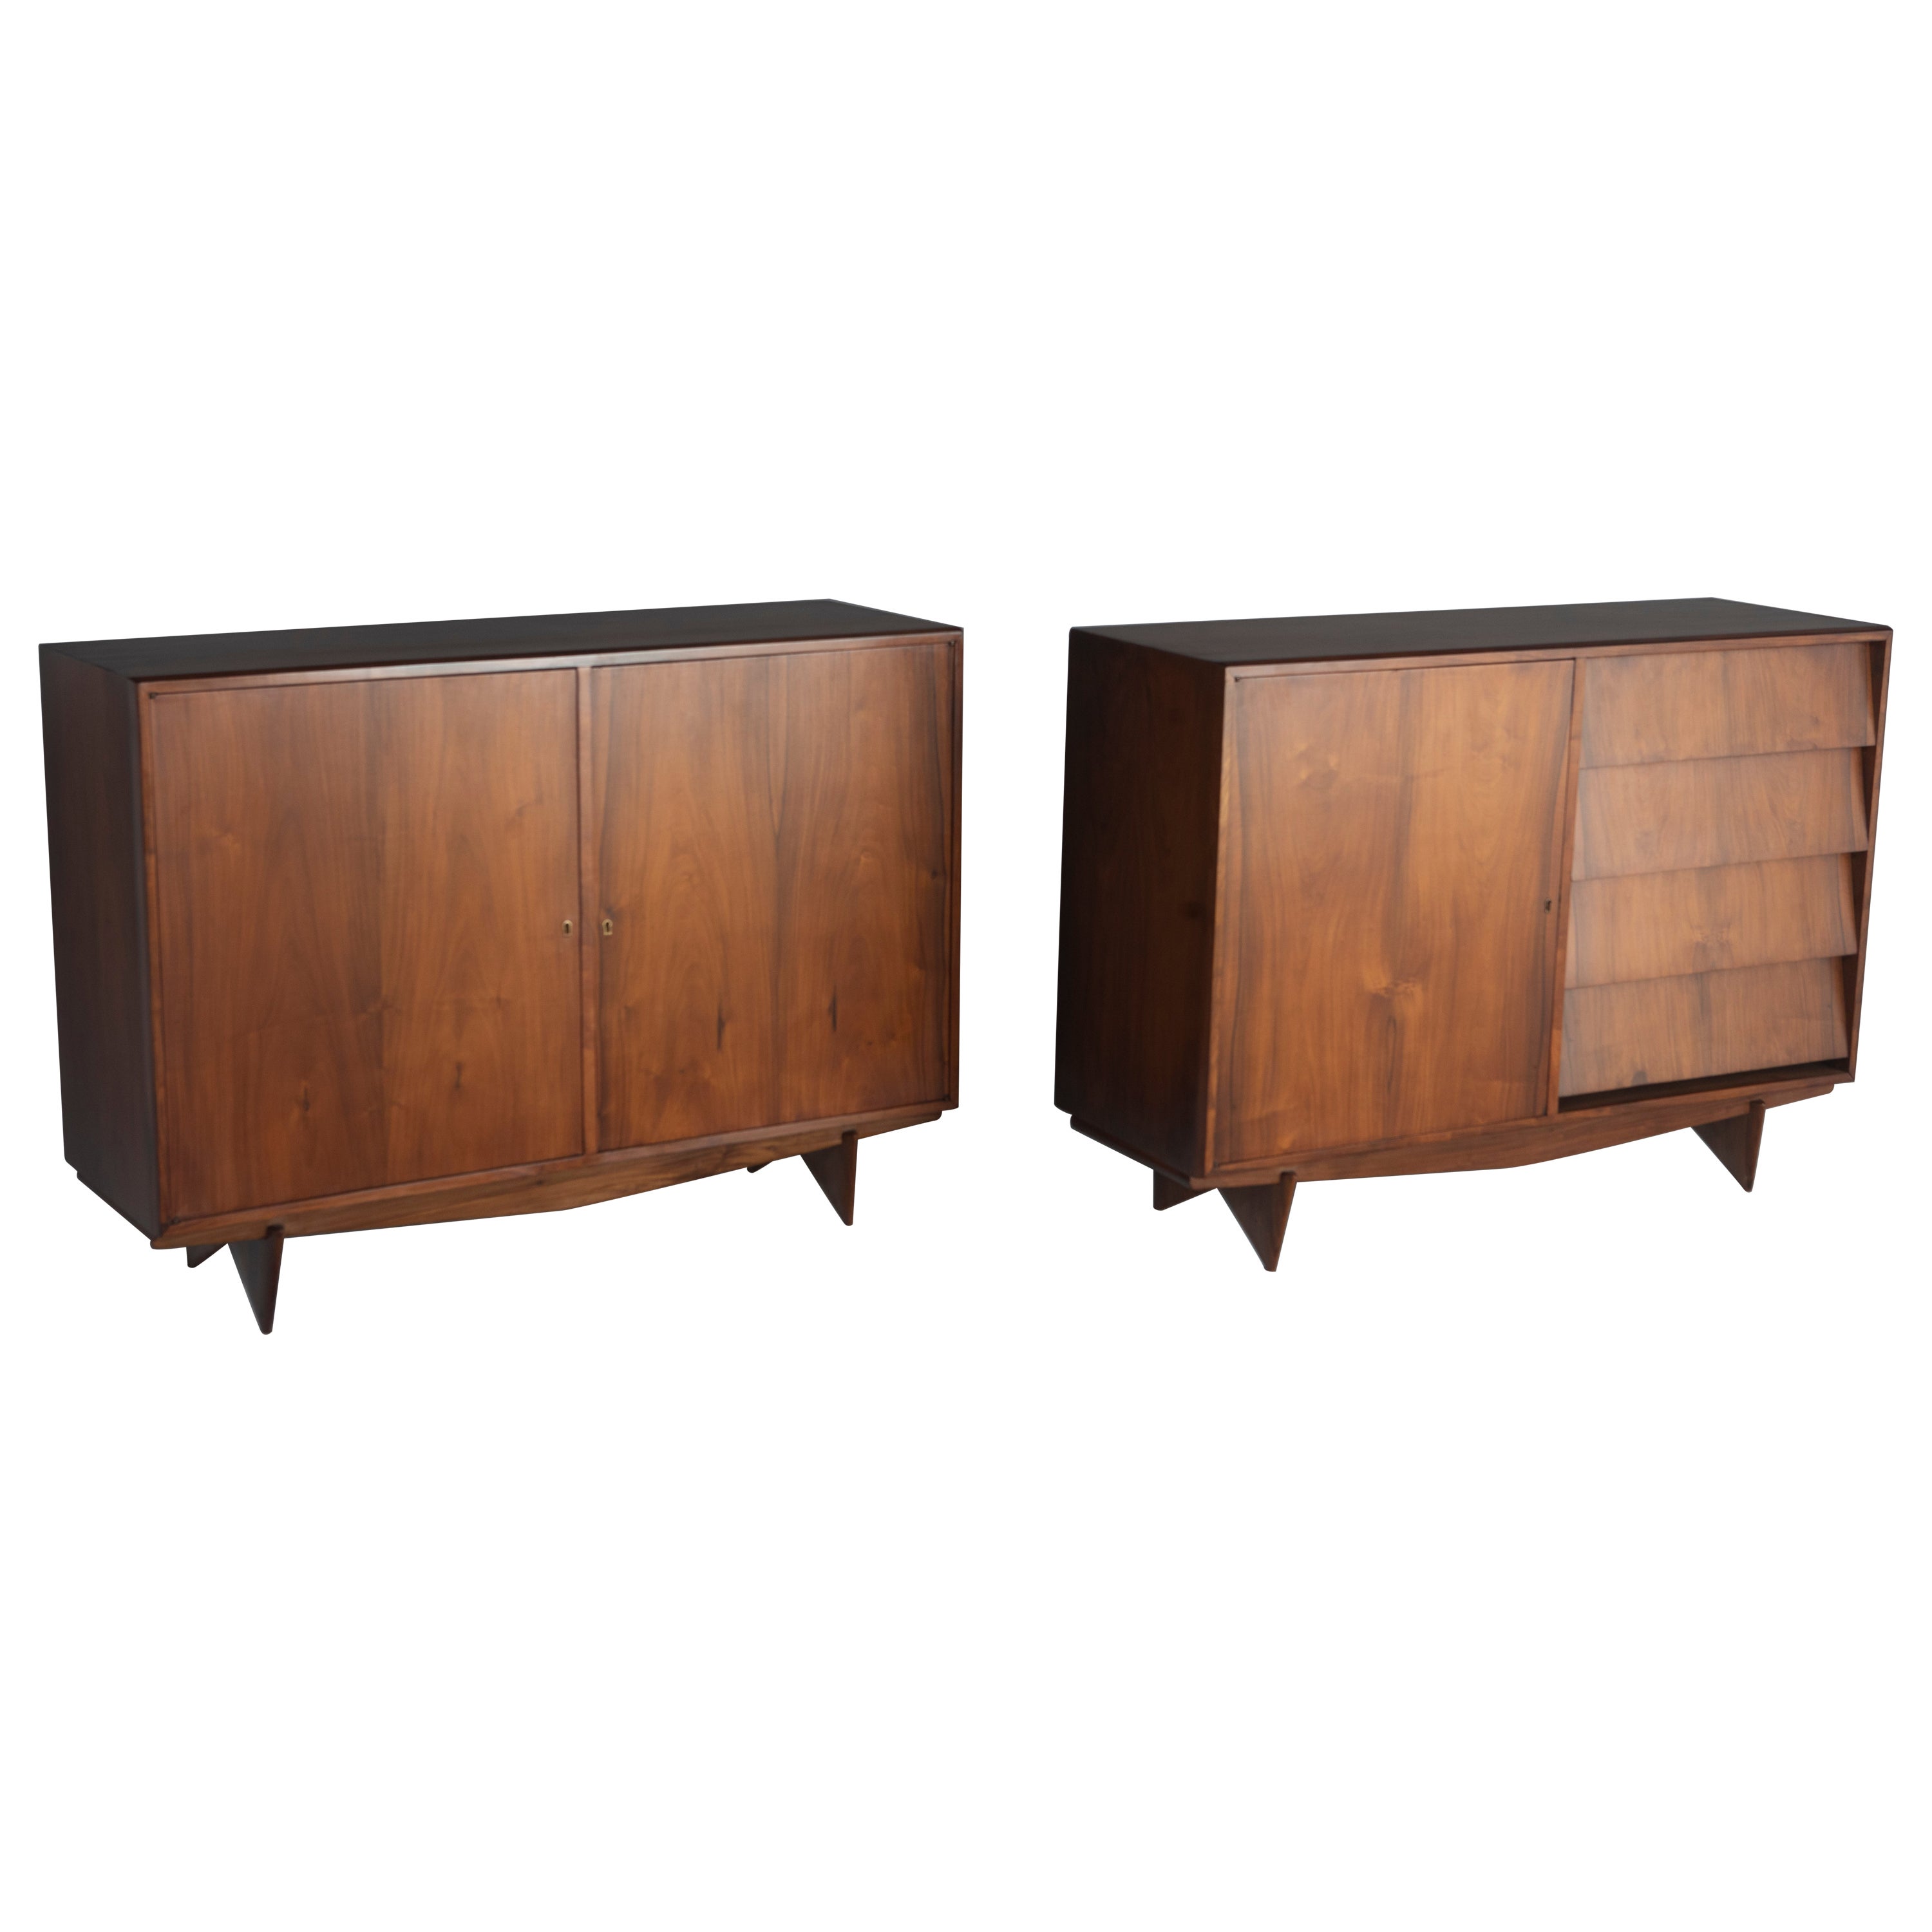 Mid-Century Modern Pair of Sideboards by Carlo Hauner, 1950s For Sale